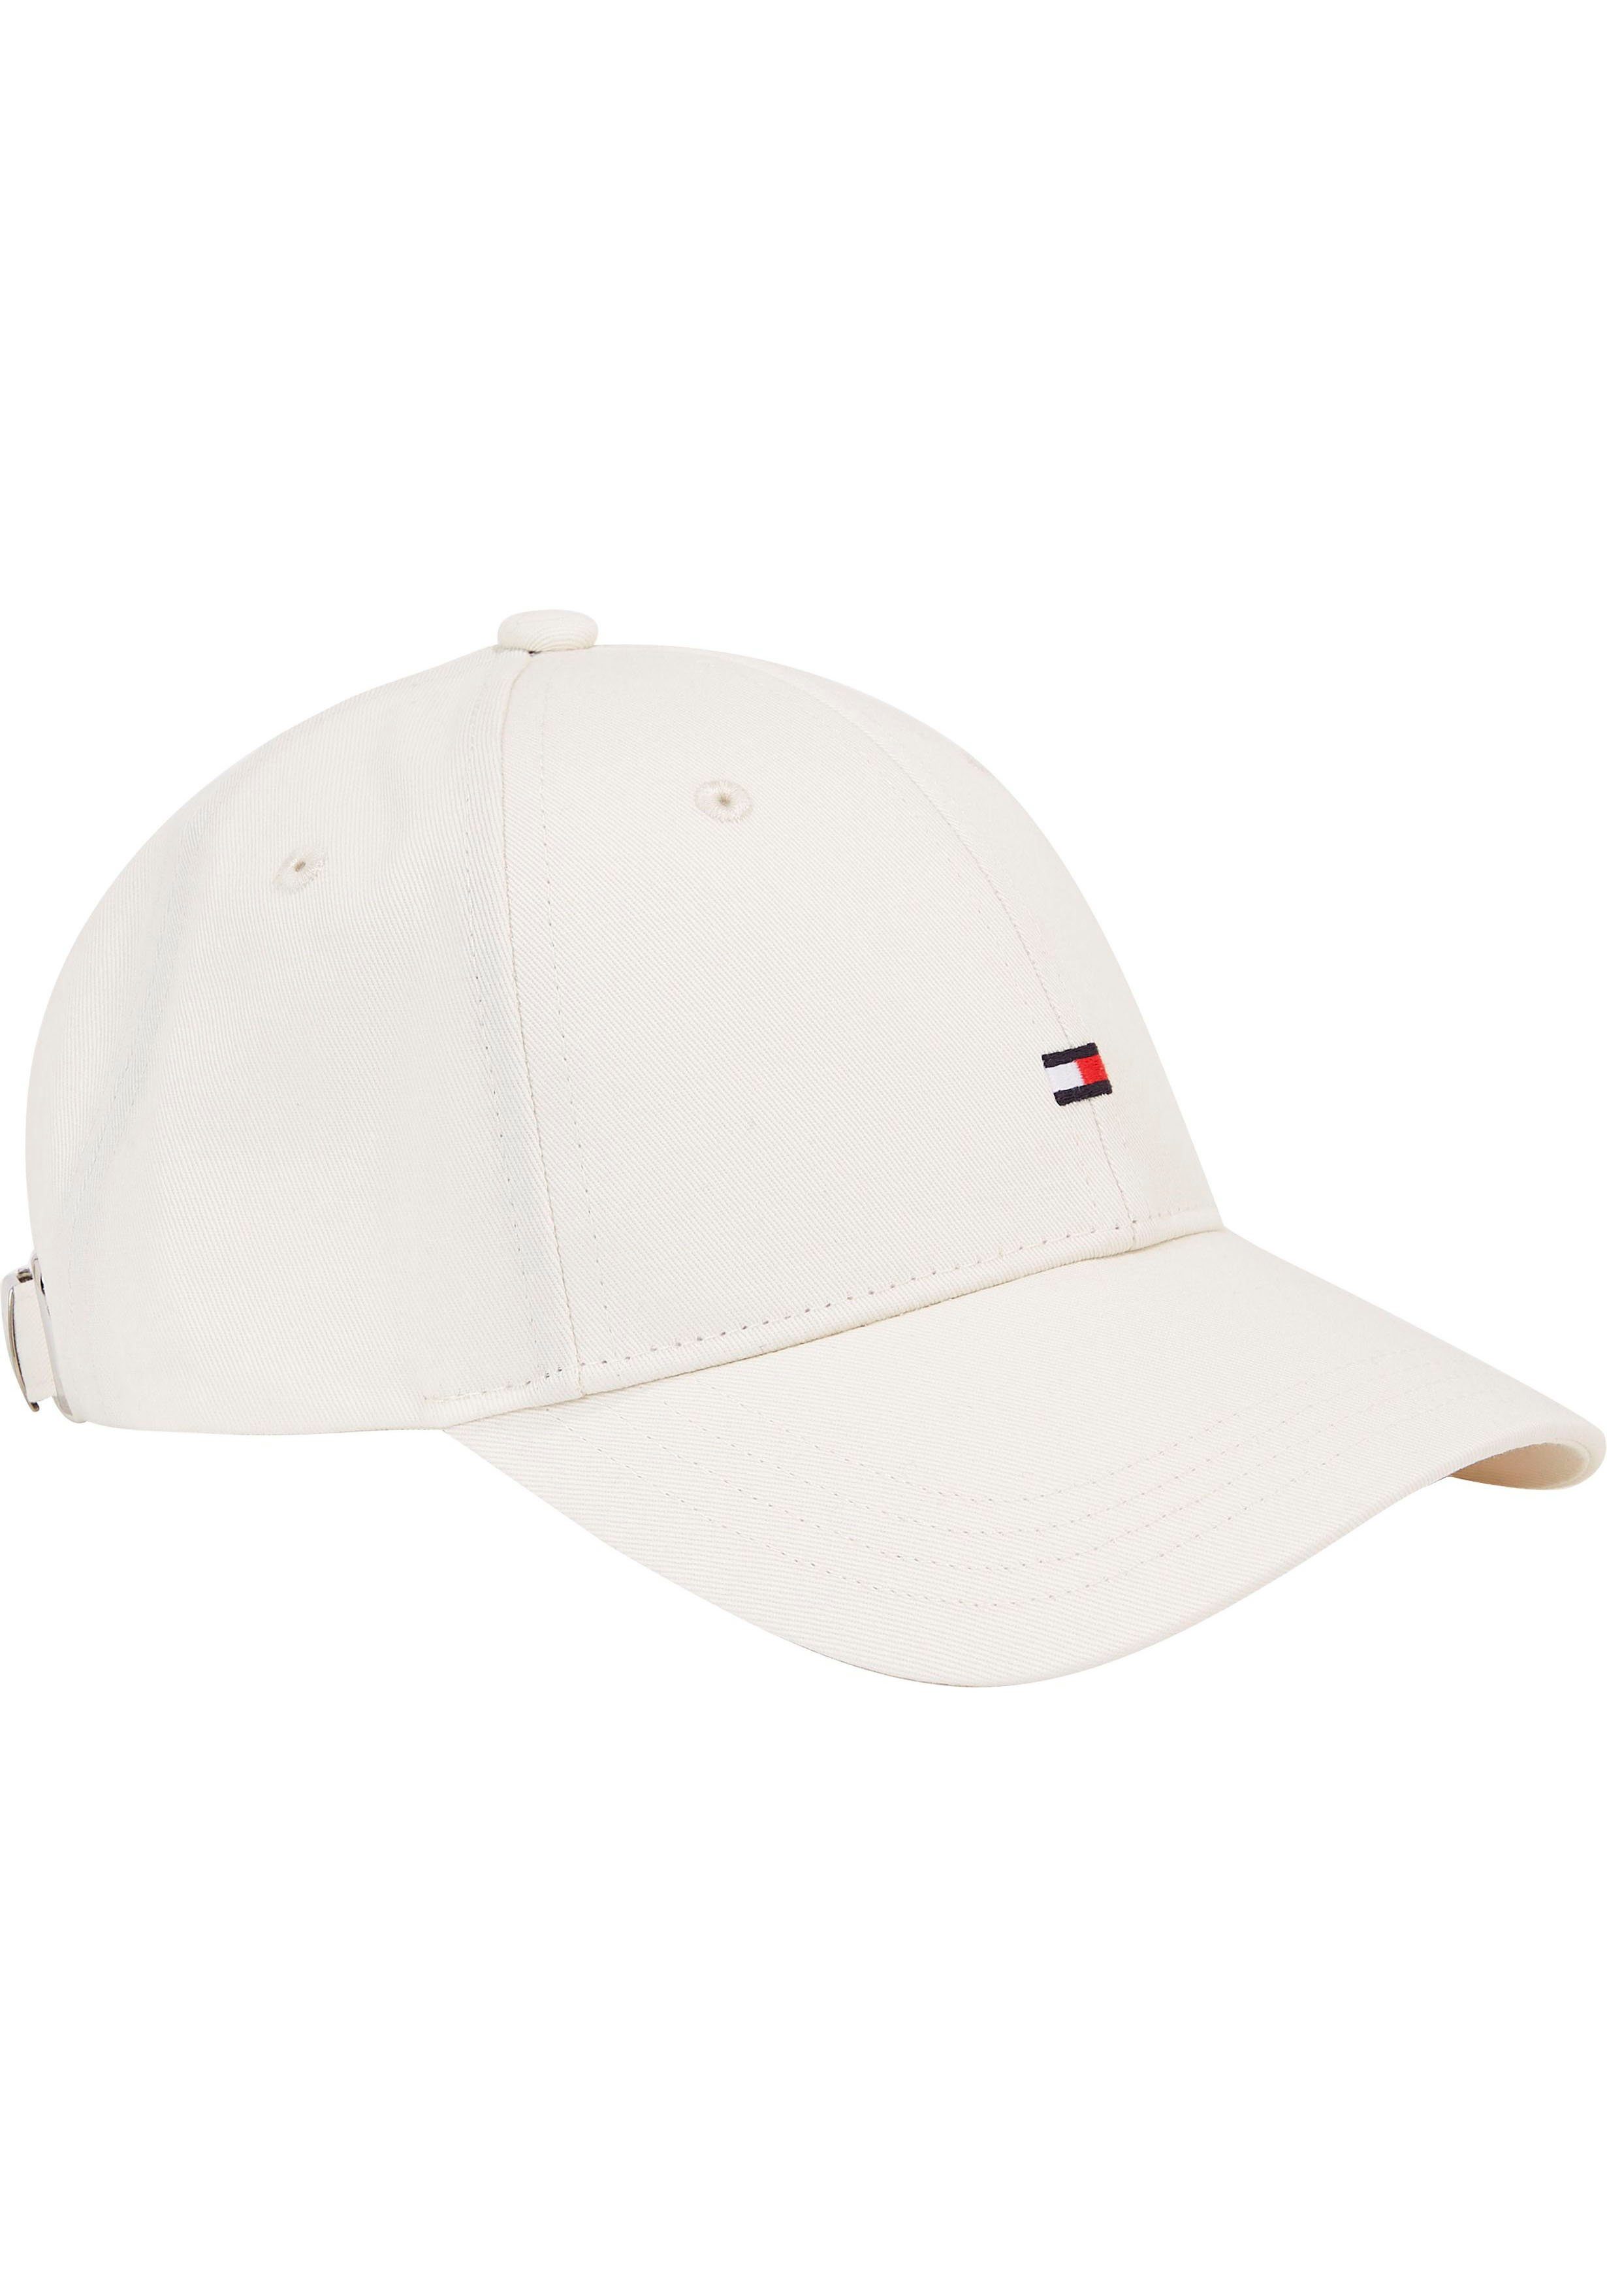 Tommy Hilfiger Fitted SMALL Cap FLAG Calico mit Klemmverschluss CAP